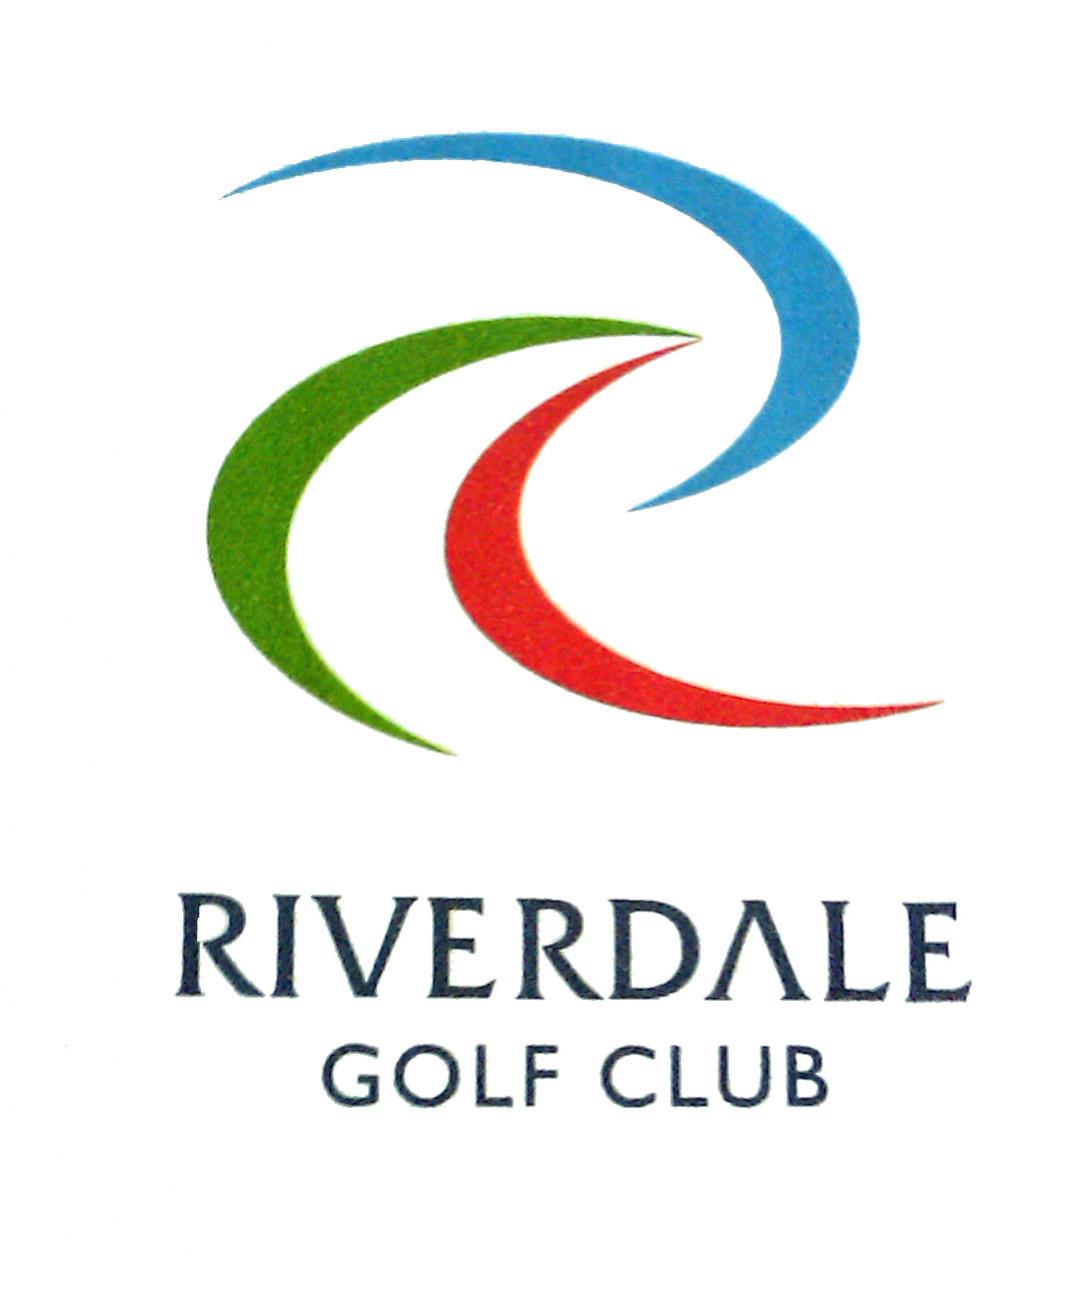 Riverdale golf and country club co. ltd